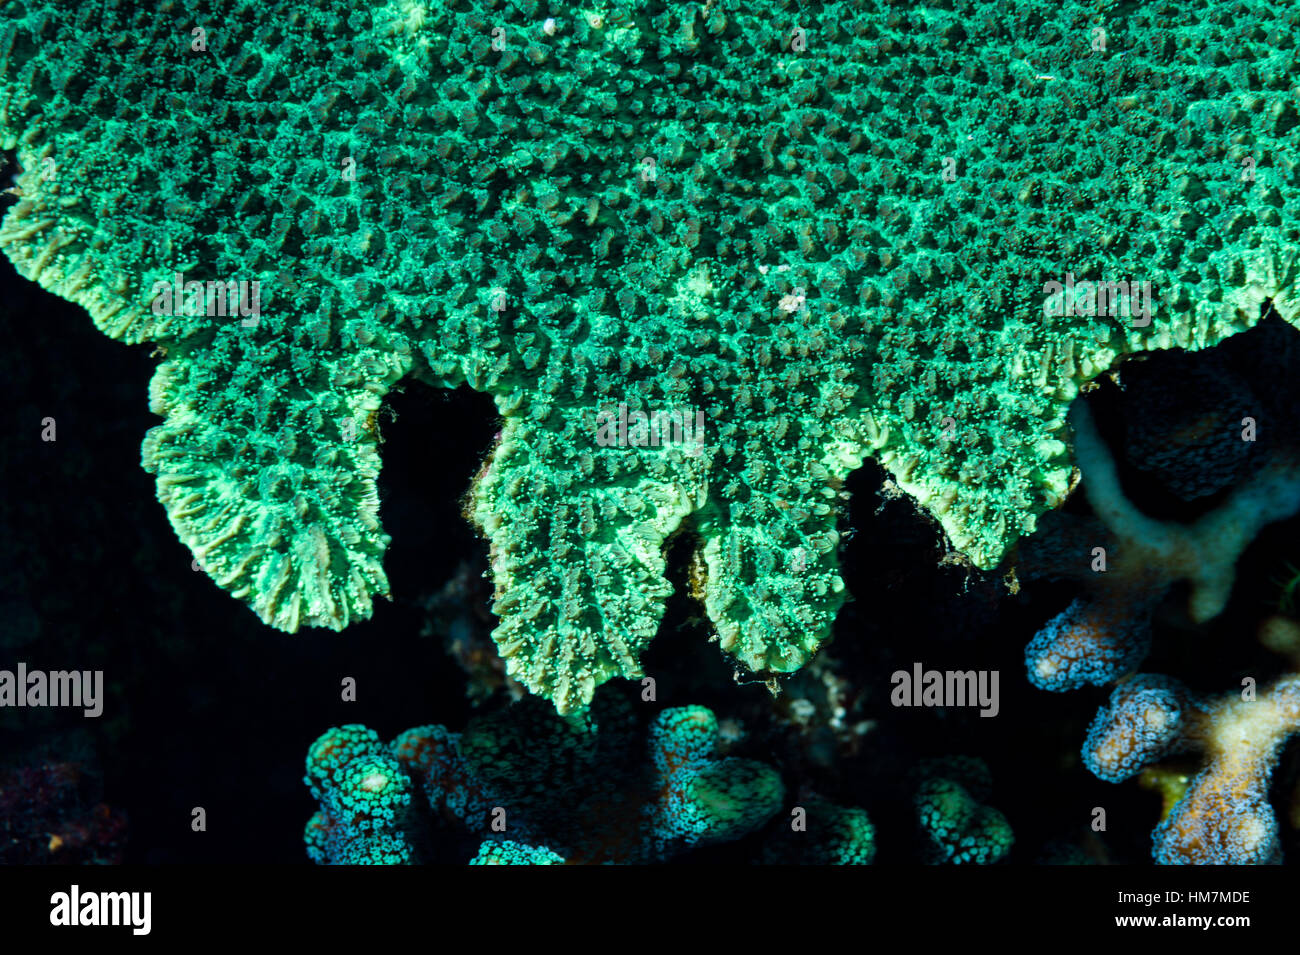 The rough surface and scalloped edge of a bright green hard coral on a reef. Stock Photo